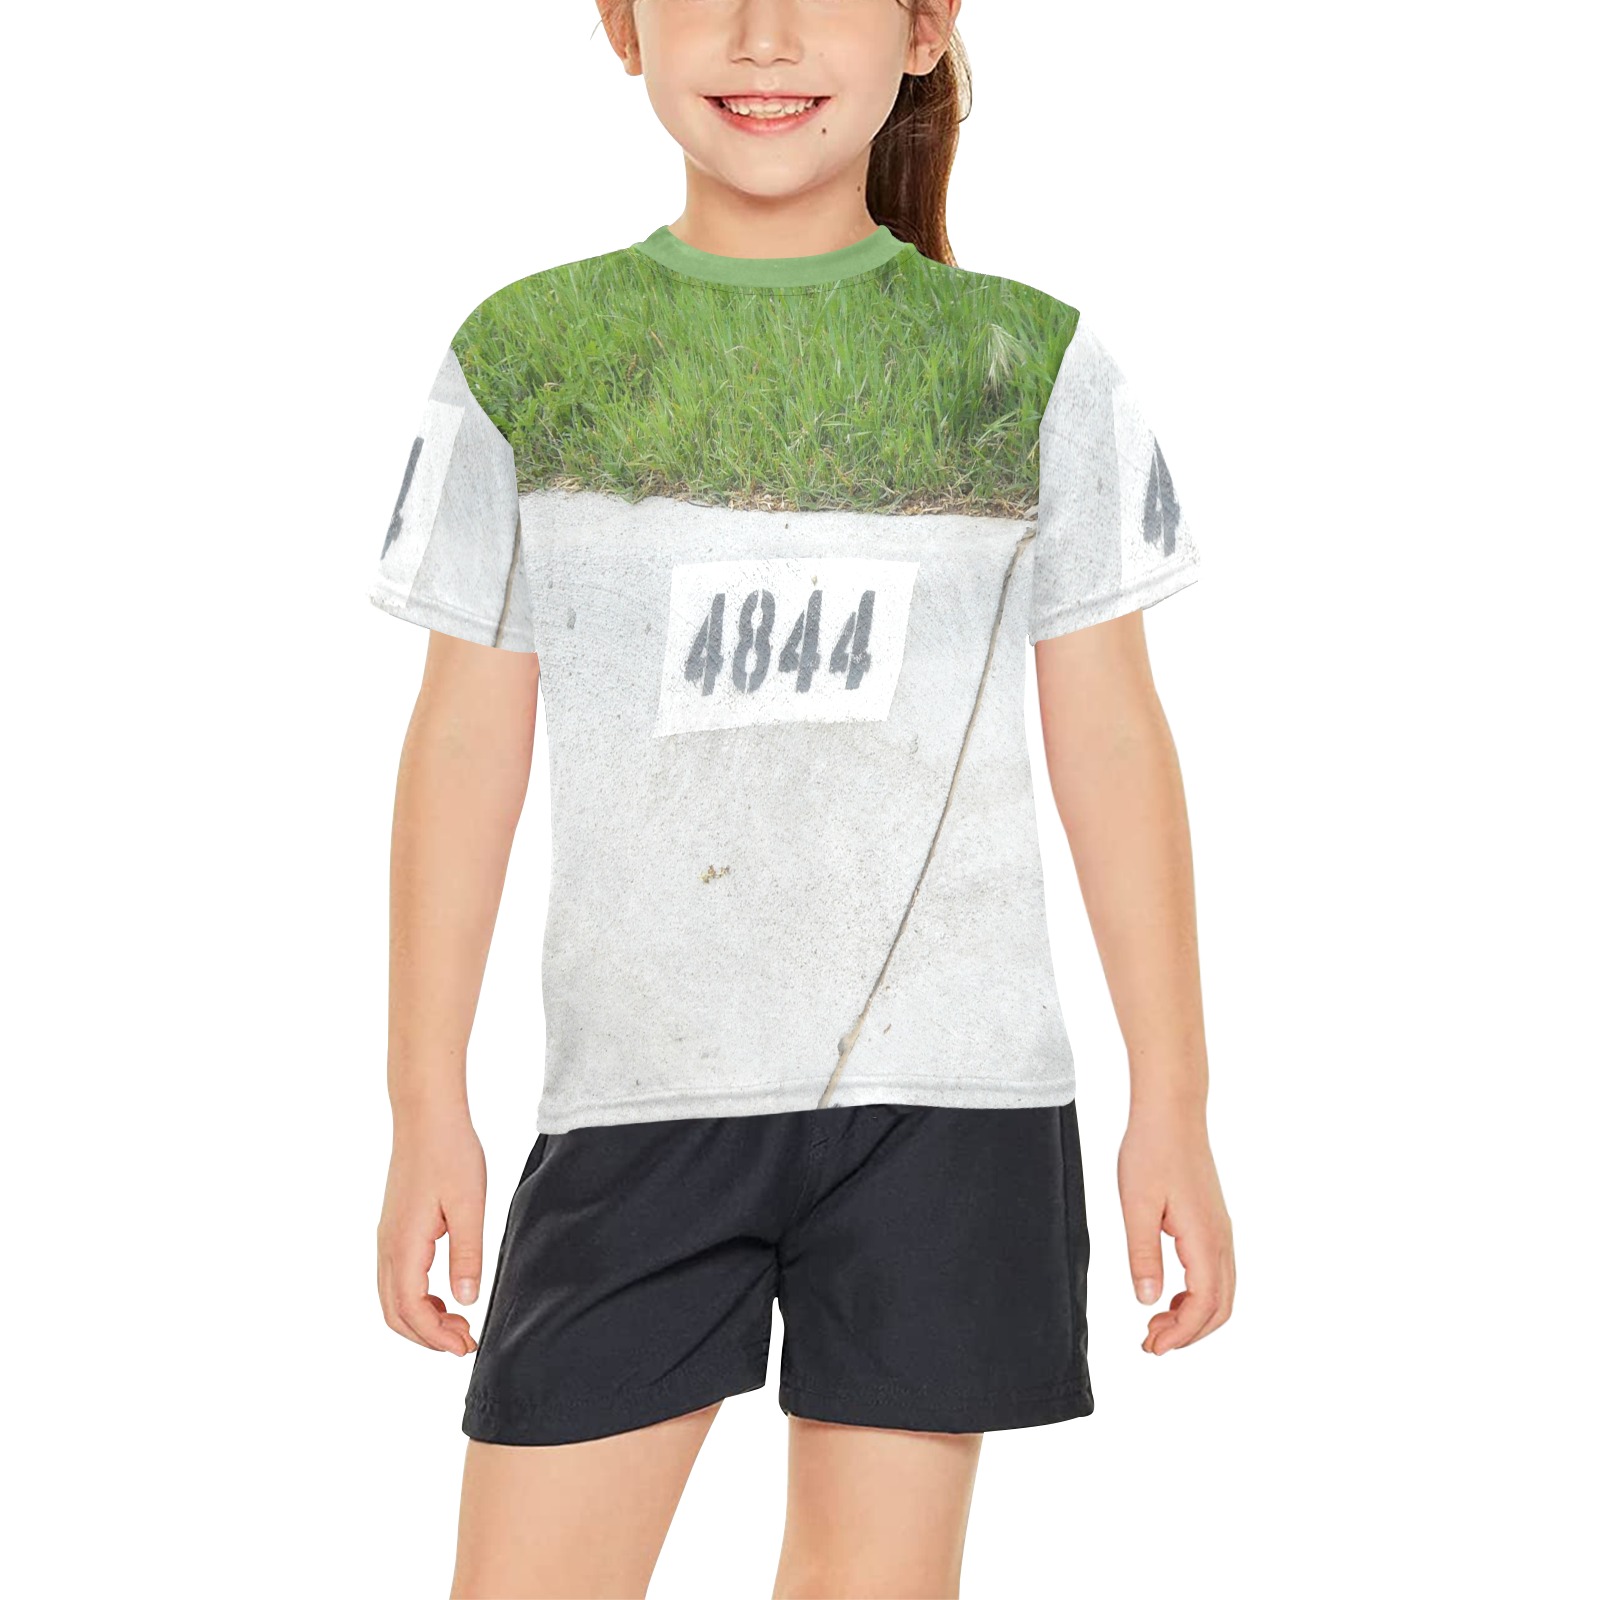 Street Number 4844 with green collar Big Girls' All Over Print Crew Neck T-Shirt (Model T40-2)